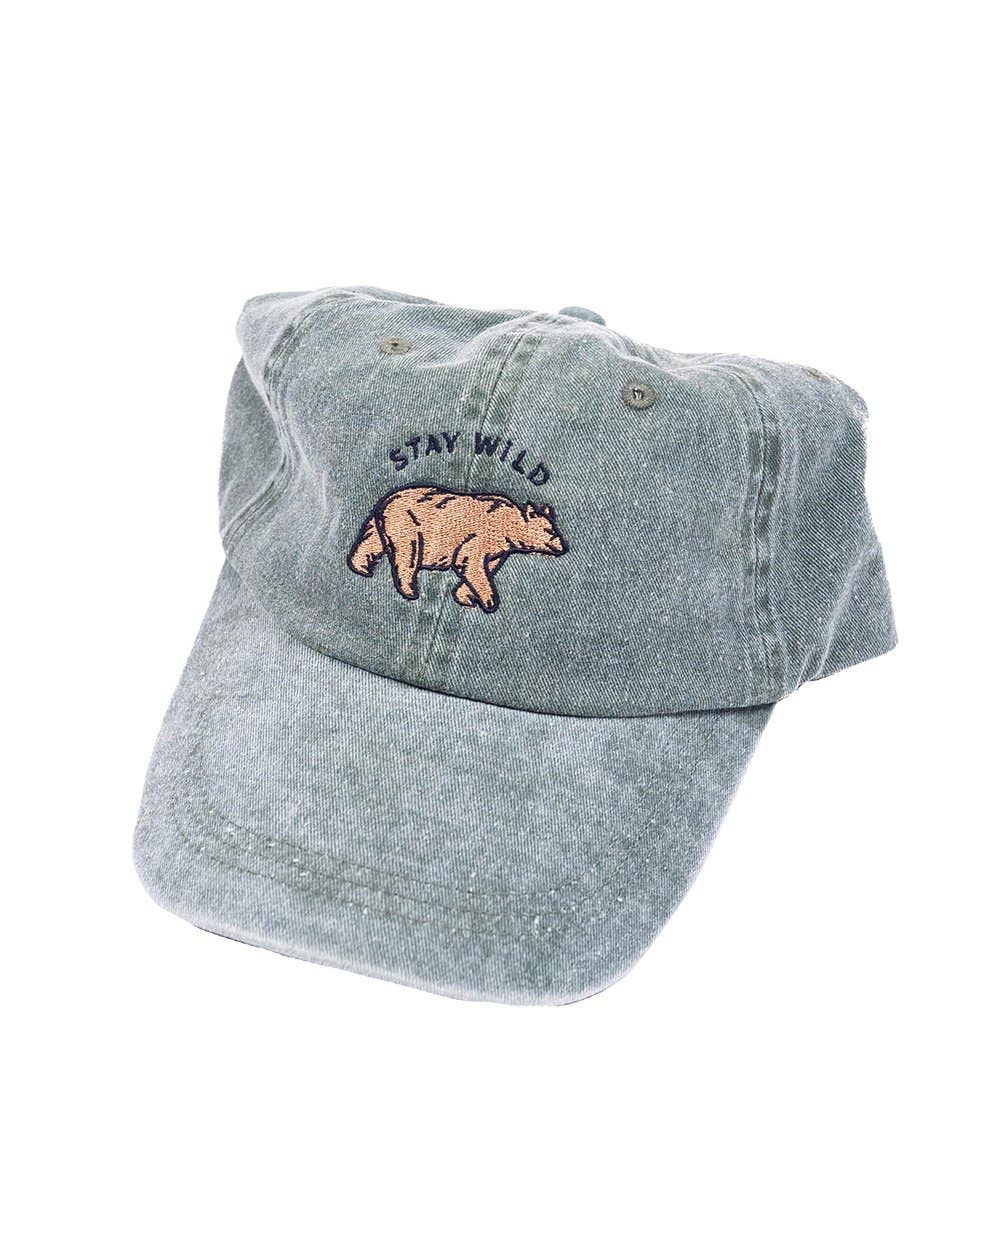 Stay Wild bear dad hat by Keep Nature Wild